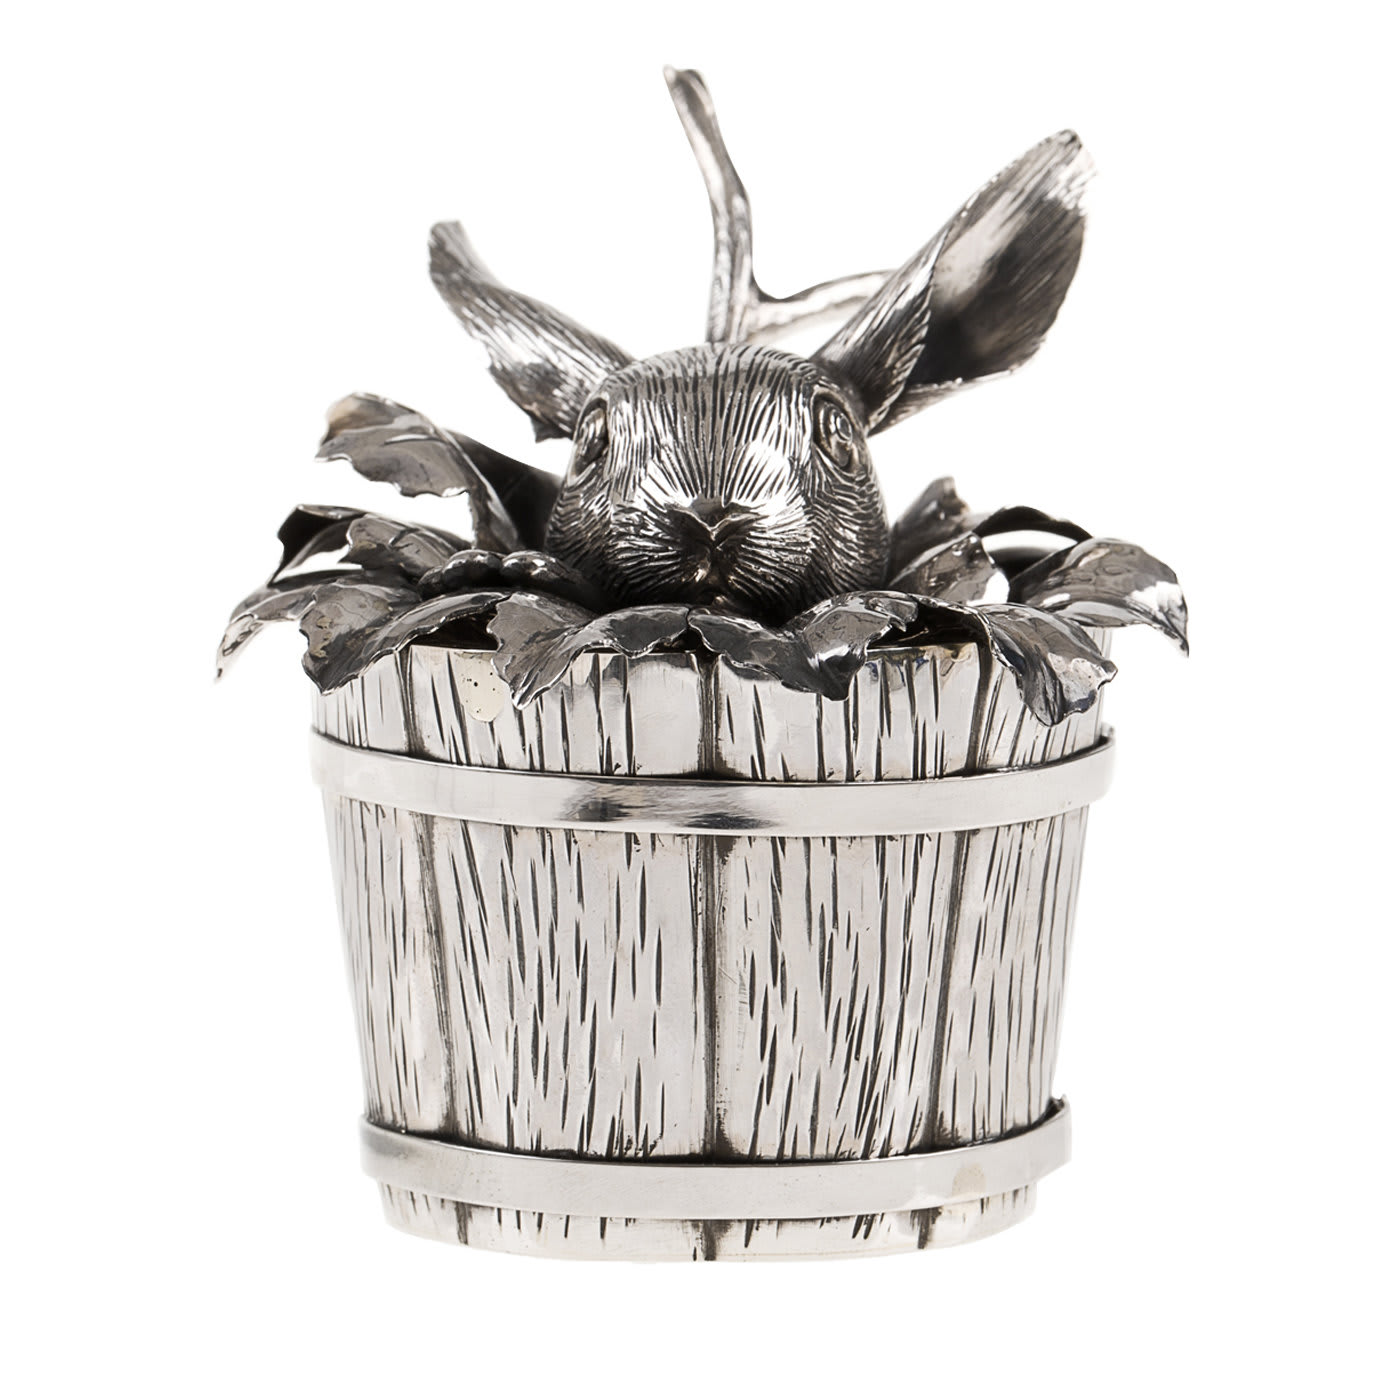 Bunny Sterling Silver Sugar Container - Fratelli Lisi